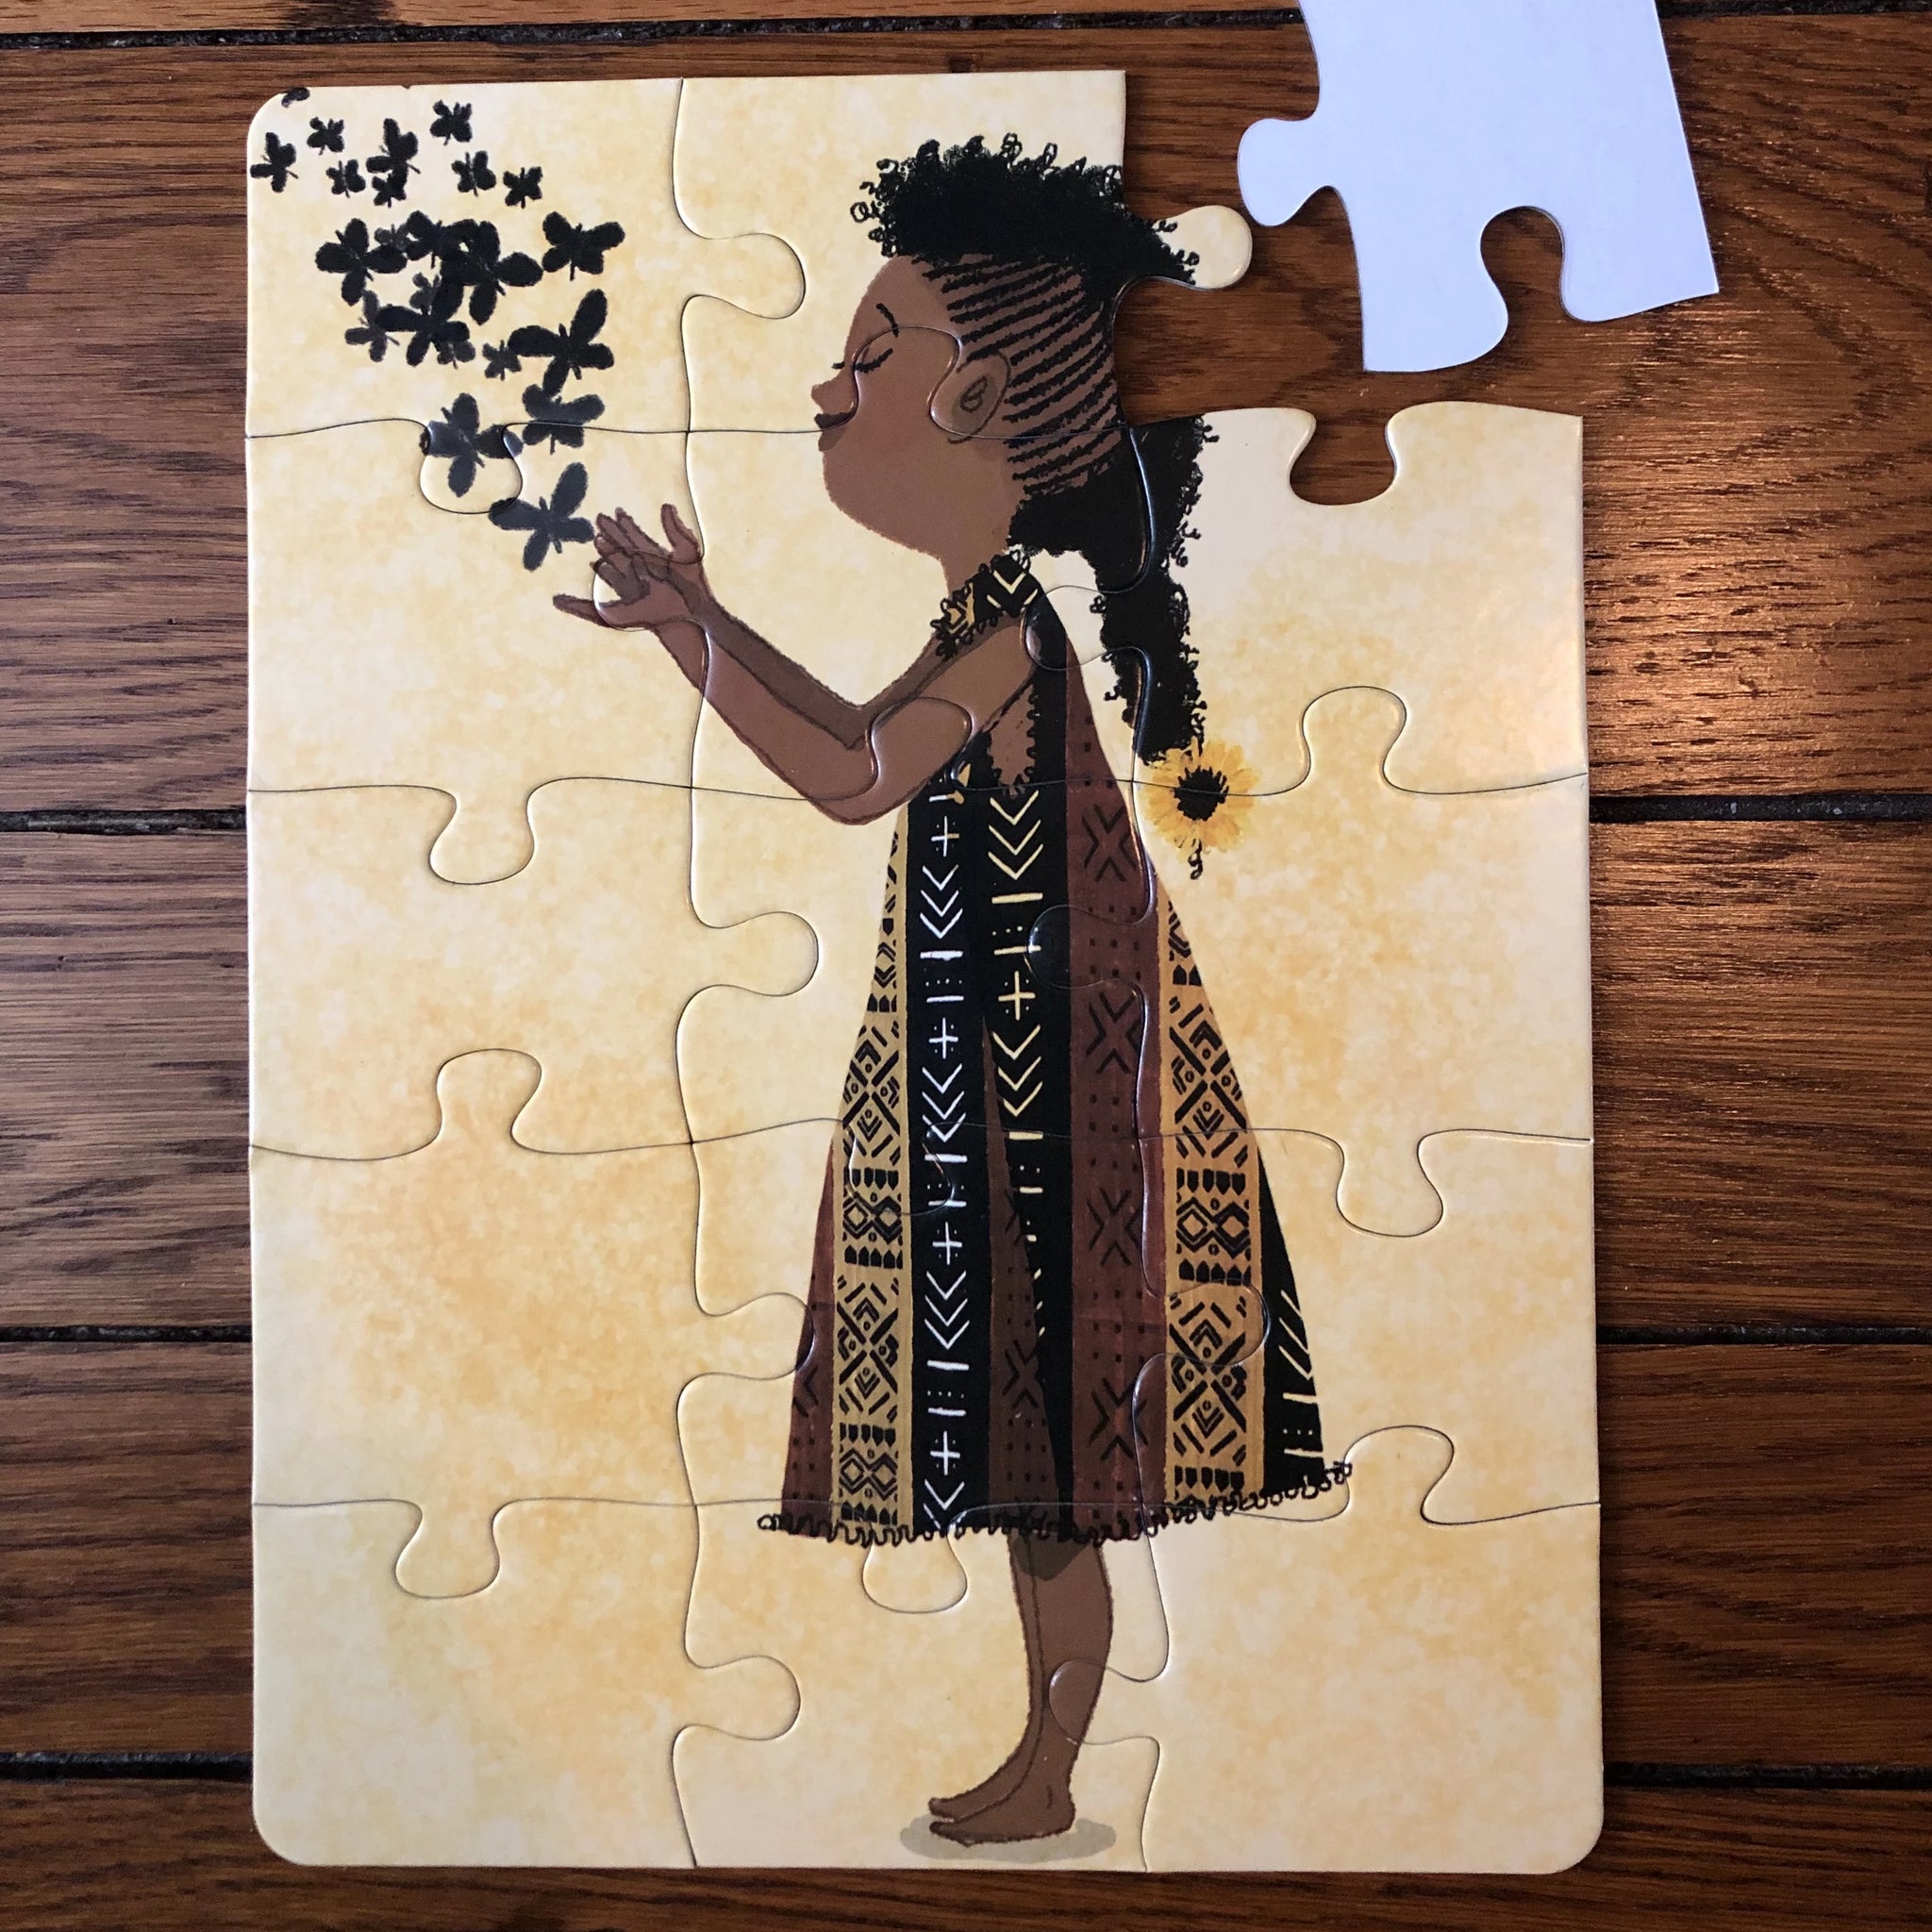 Art x Puzzles: Puzzles with Purpose – Art x Puzzles Puzzles with Purpose